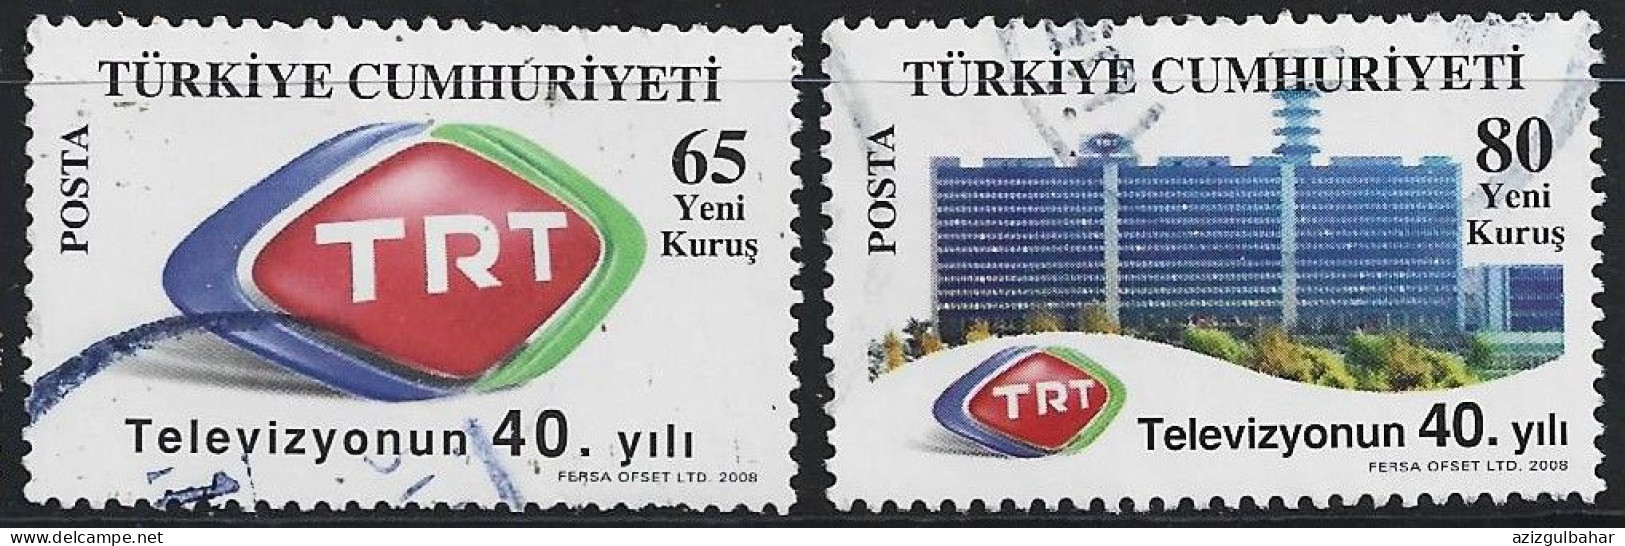 TURKIYE STAMPS - 2008 - TRT TELEVISION - Used Stamps